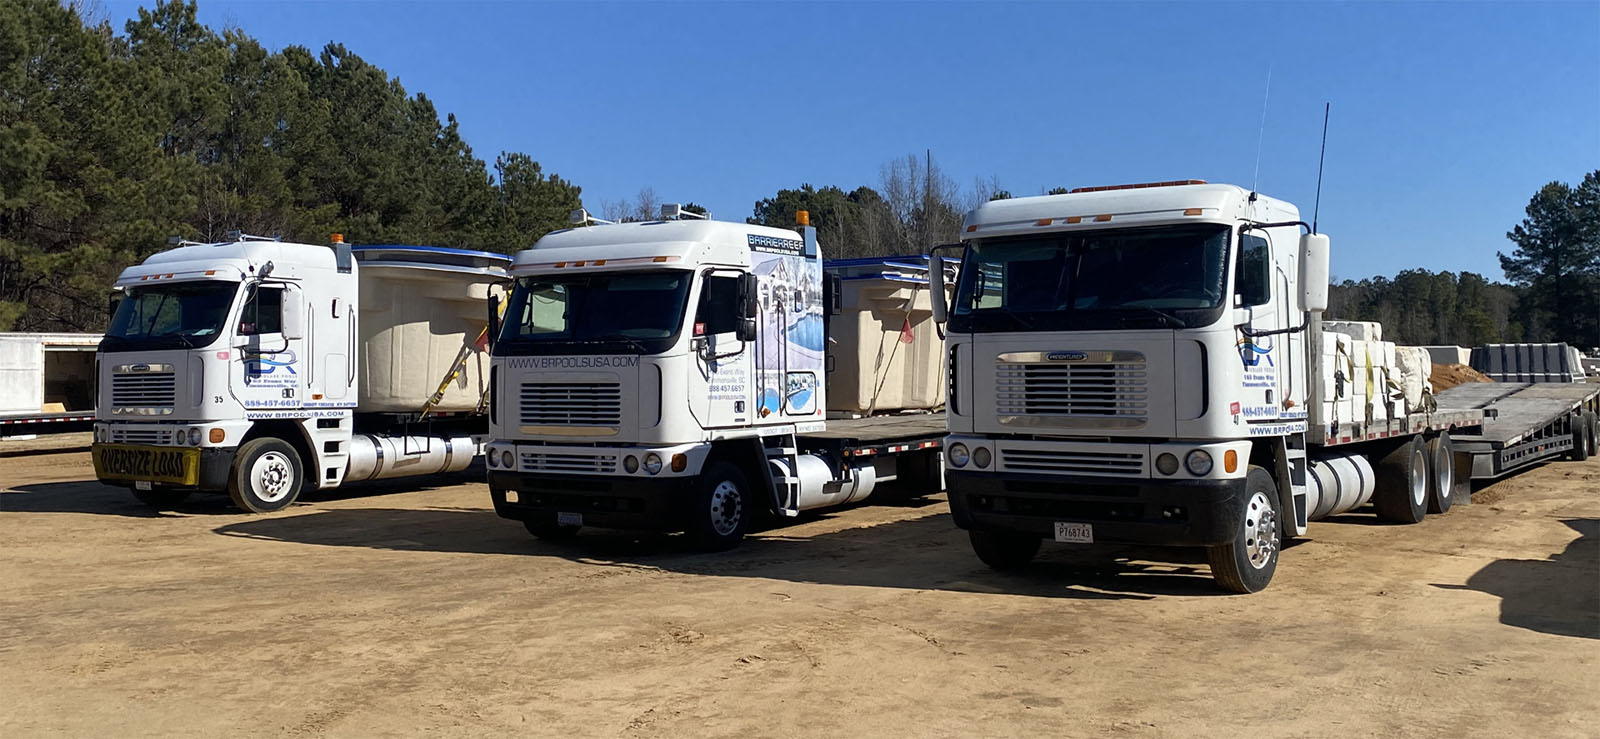 Barrier Reef trucks lined up for in-ground fiberglass swimming pool delivery and transportation